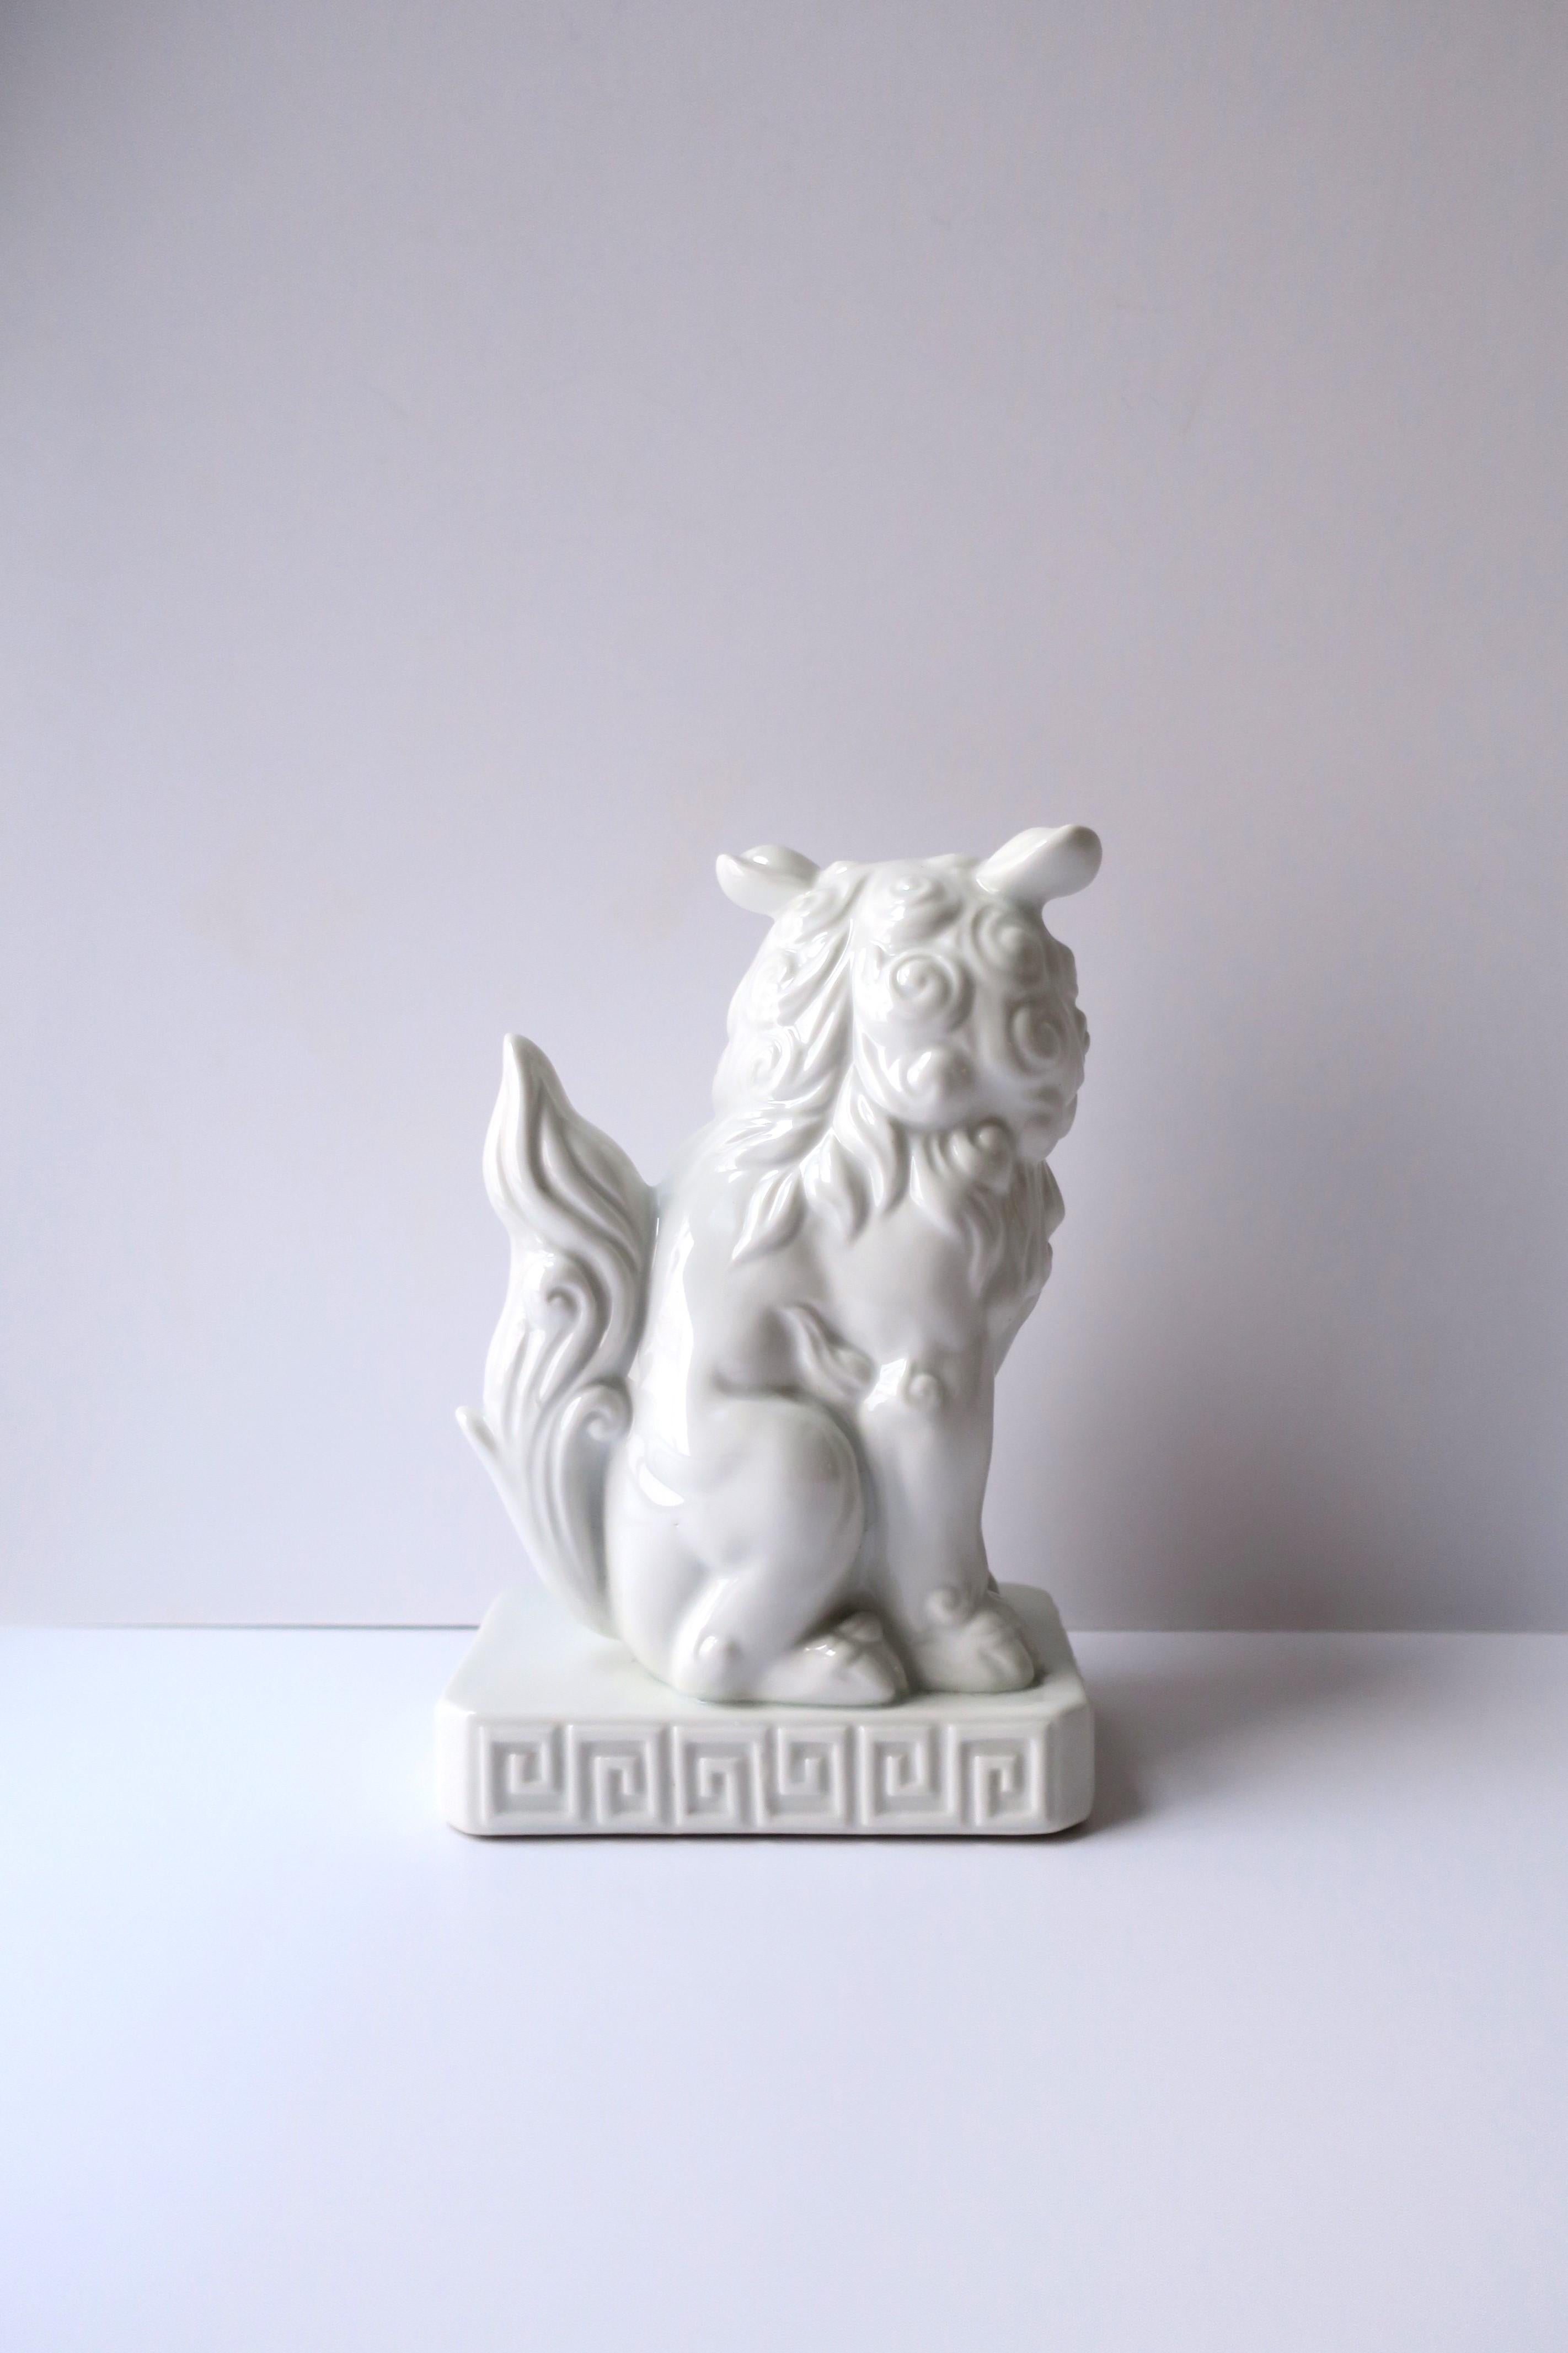 20th Century White Porcelain Foo Dog Lion Decorative Object or Bookend from Japan For Sale